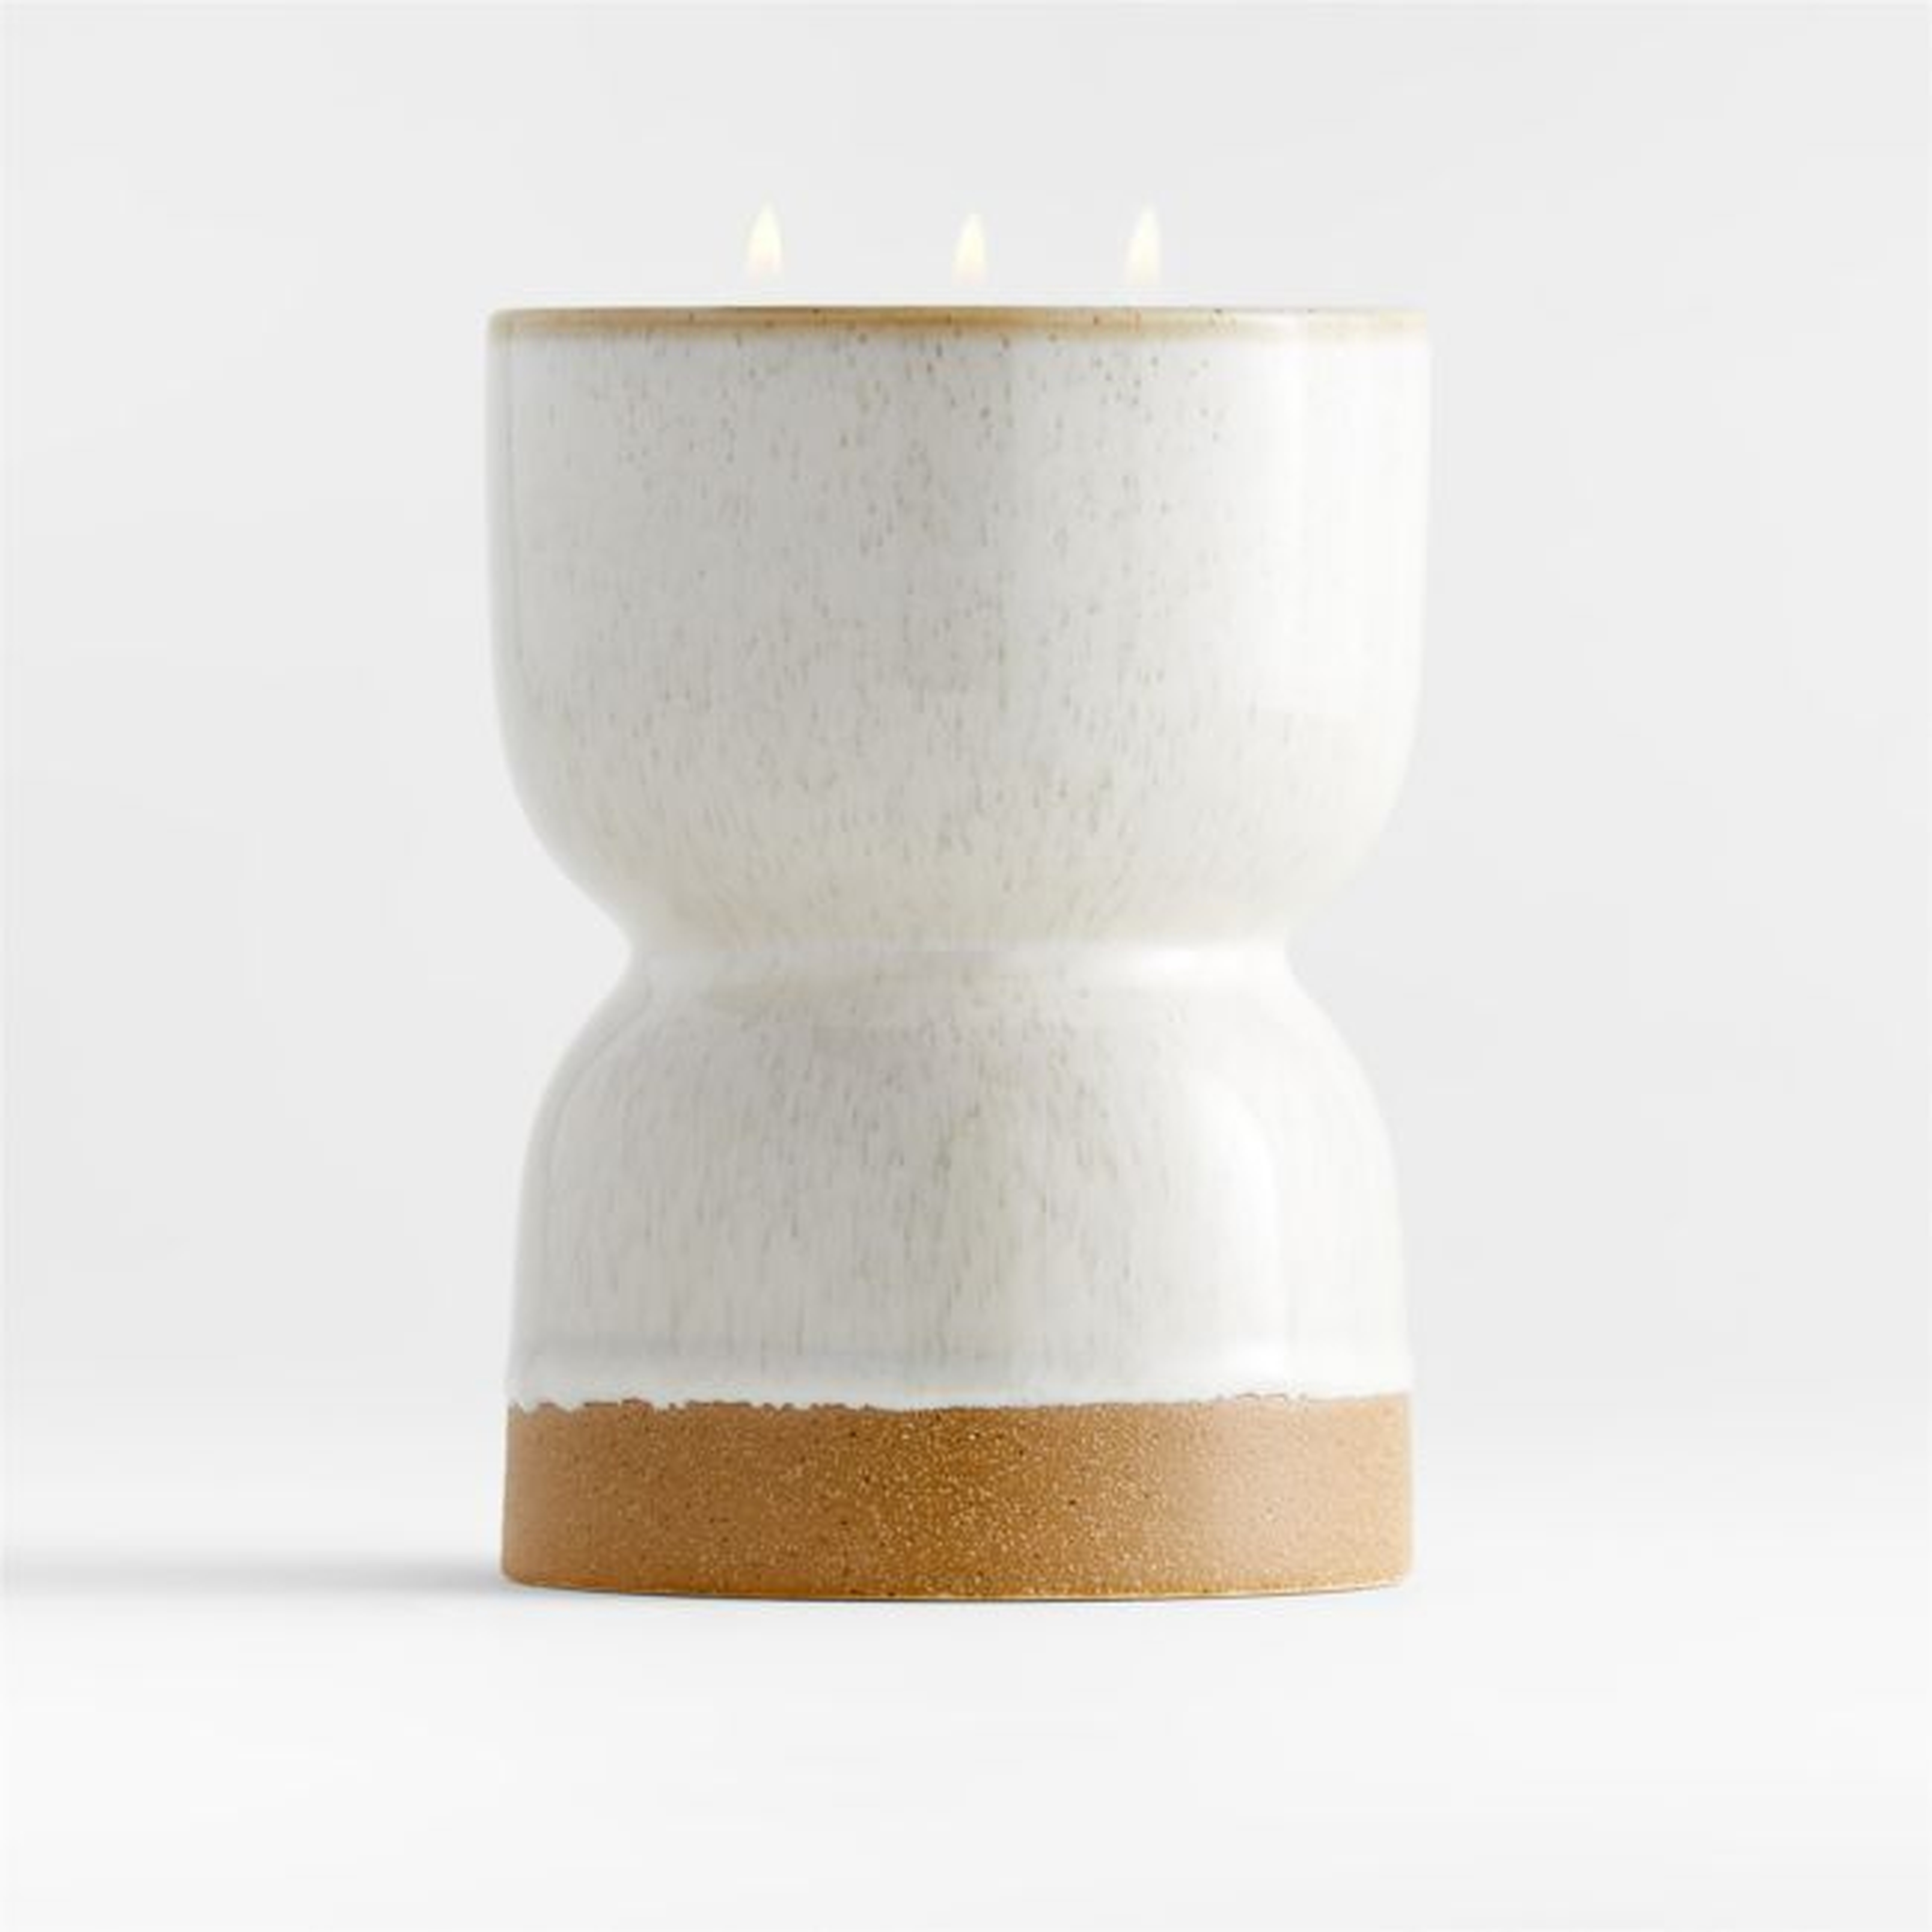 Cinnamon, Tobacco, Patchouli 3 Wick Scented Candle - Crate and Barrel